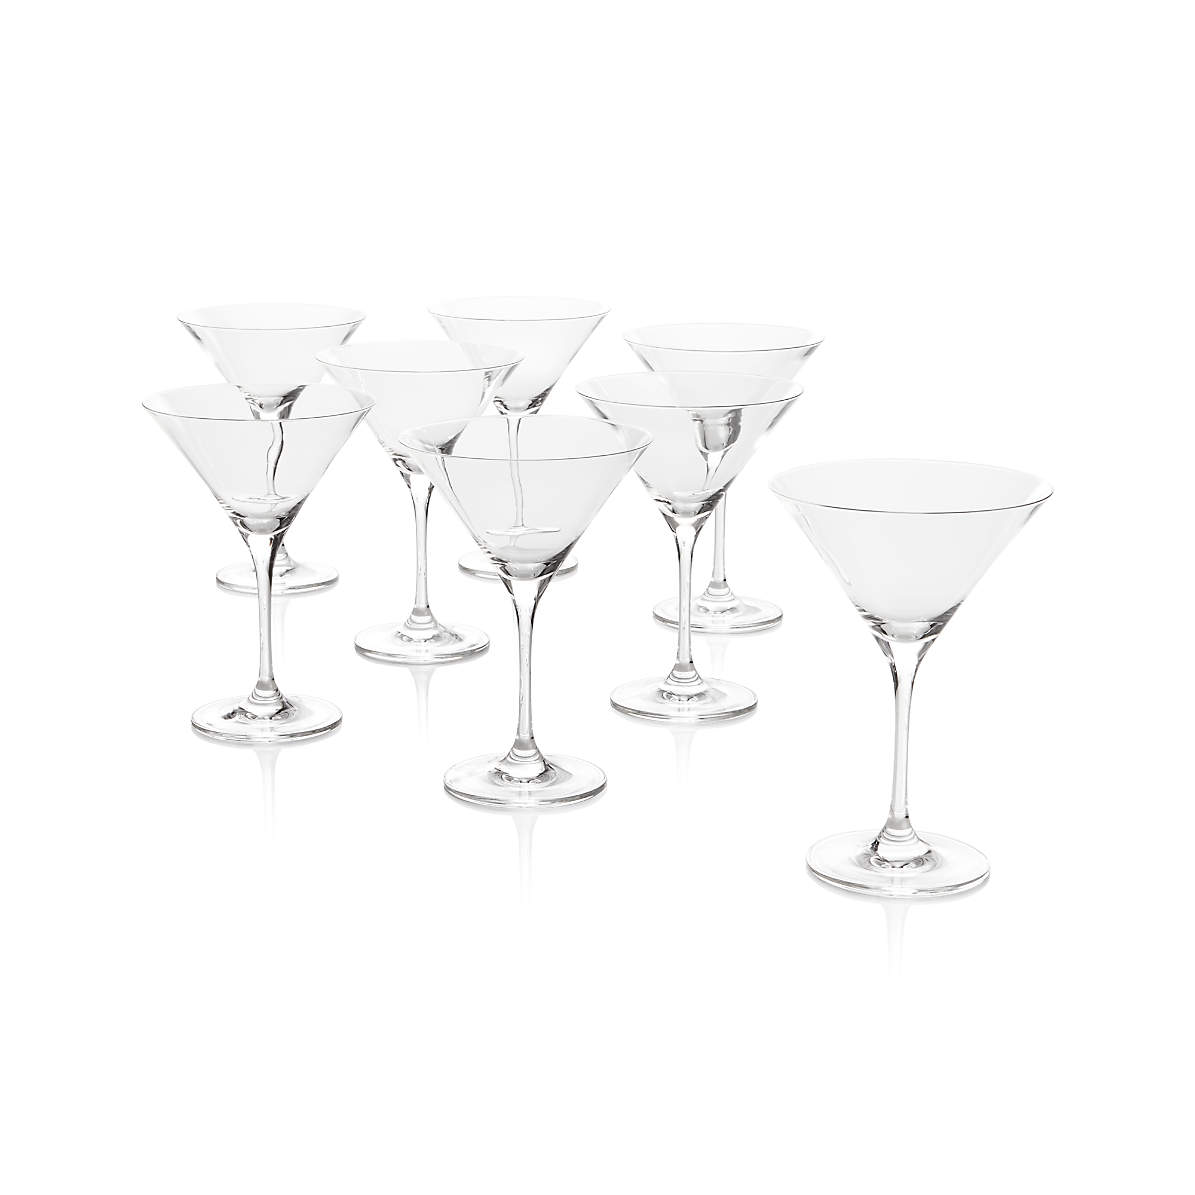 Details about   Crate & Barrel CRYSTAL MARTINI GLASS PARK AVENUE vertical Etched lines 